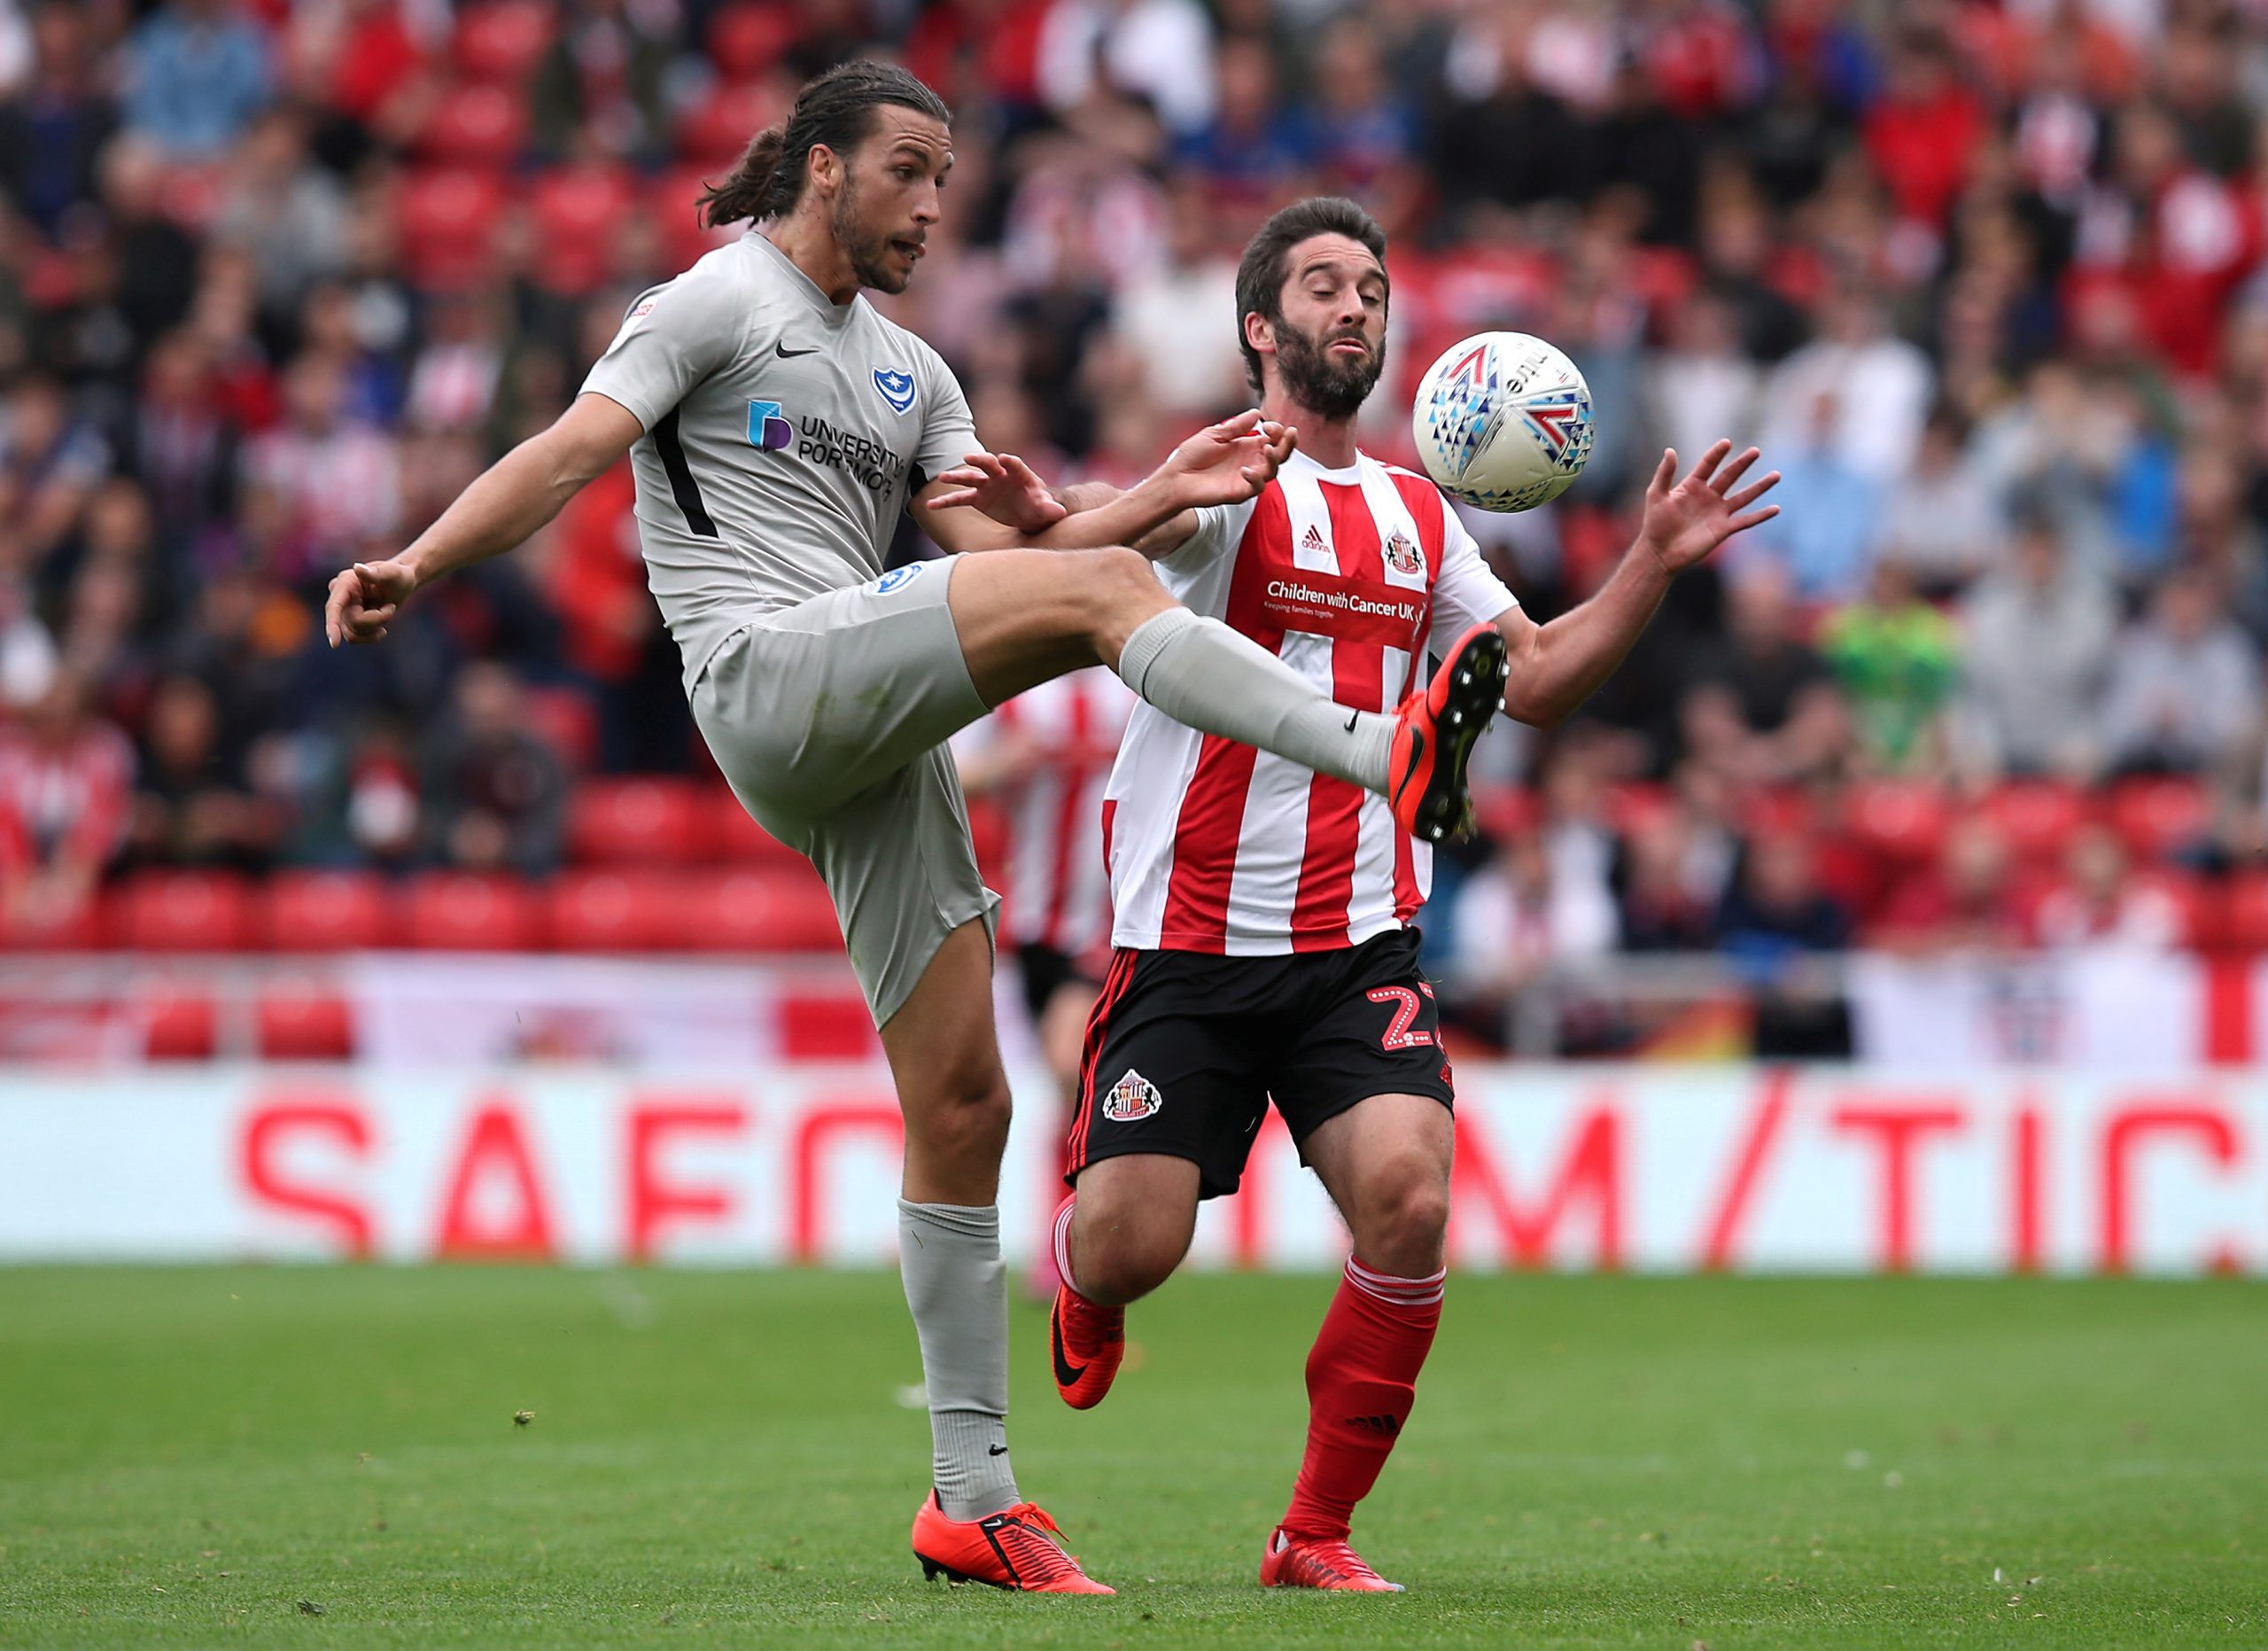 will-grigg-sunderland-league-one-rotherham-united-championship-alex-neil-paul-warne-transfer-latestSoccer Football - League One - Sunderland v Portsmouth - Stadium of Light, Sunderland, Britain - August 17, 2019   Portsmouth's Christian Burgess in action with Sunderland's Will Grigg   Action Images/John Clifton    EDITORIAL USE ONLY. No use with unauthorized audio, video, data, fixture lists, club/league logos or 